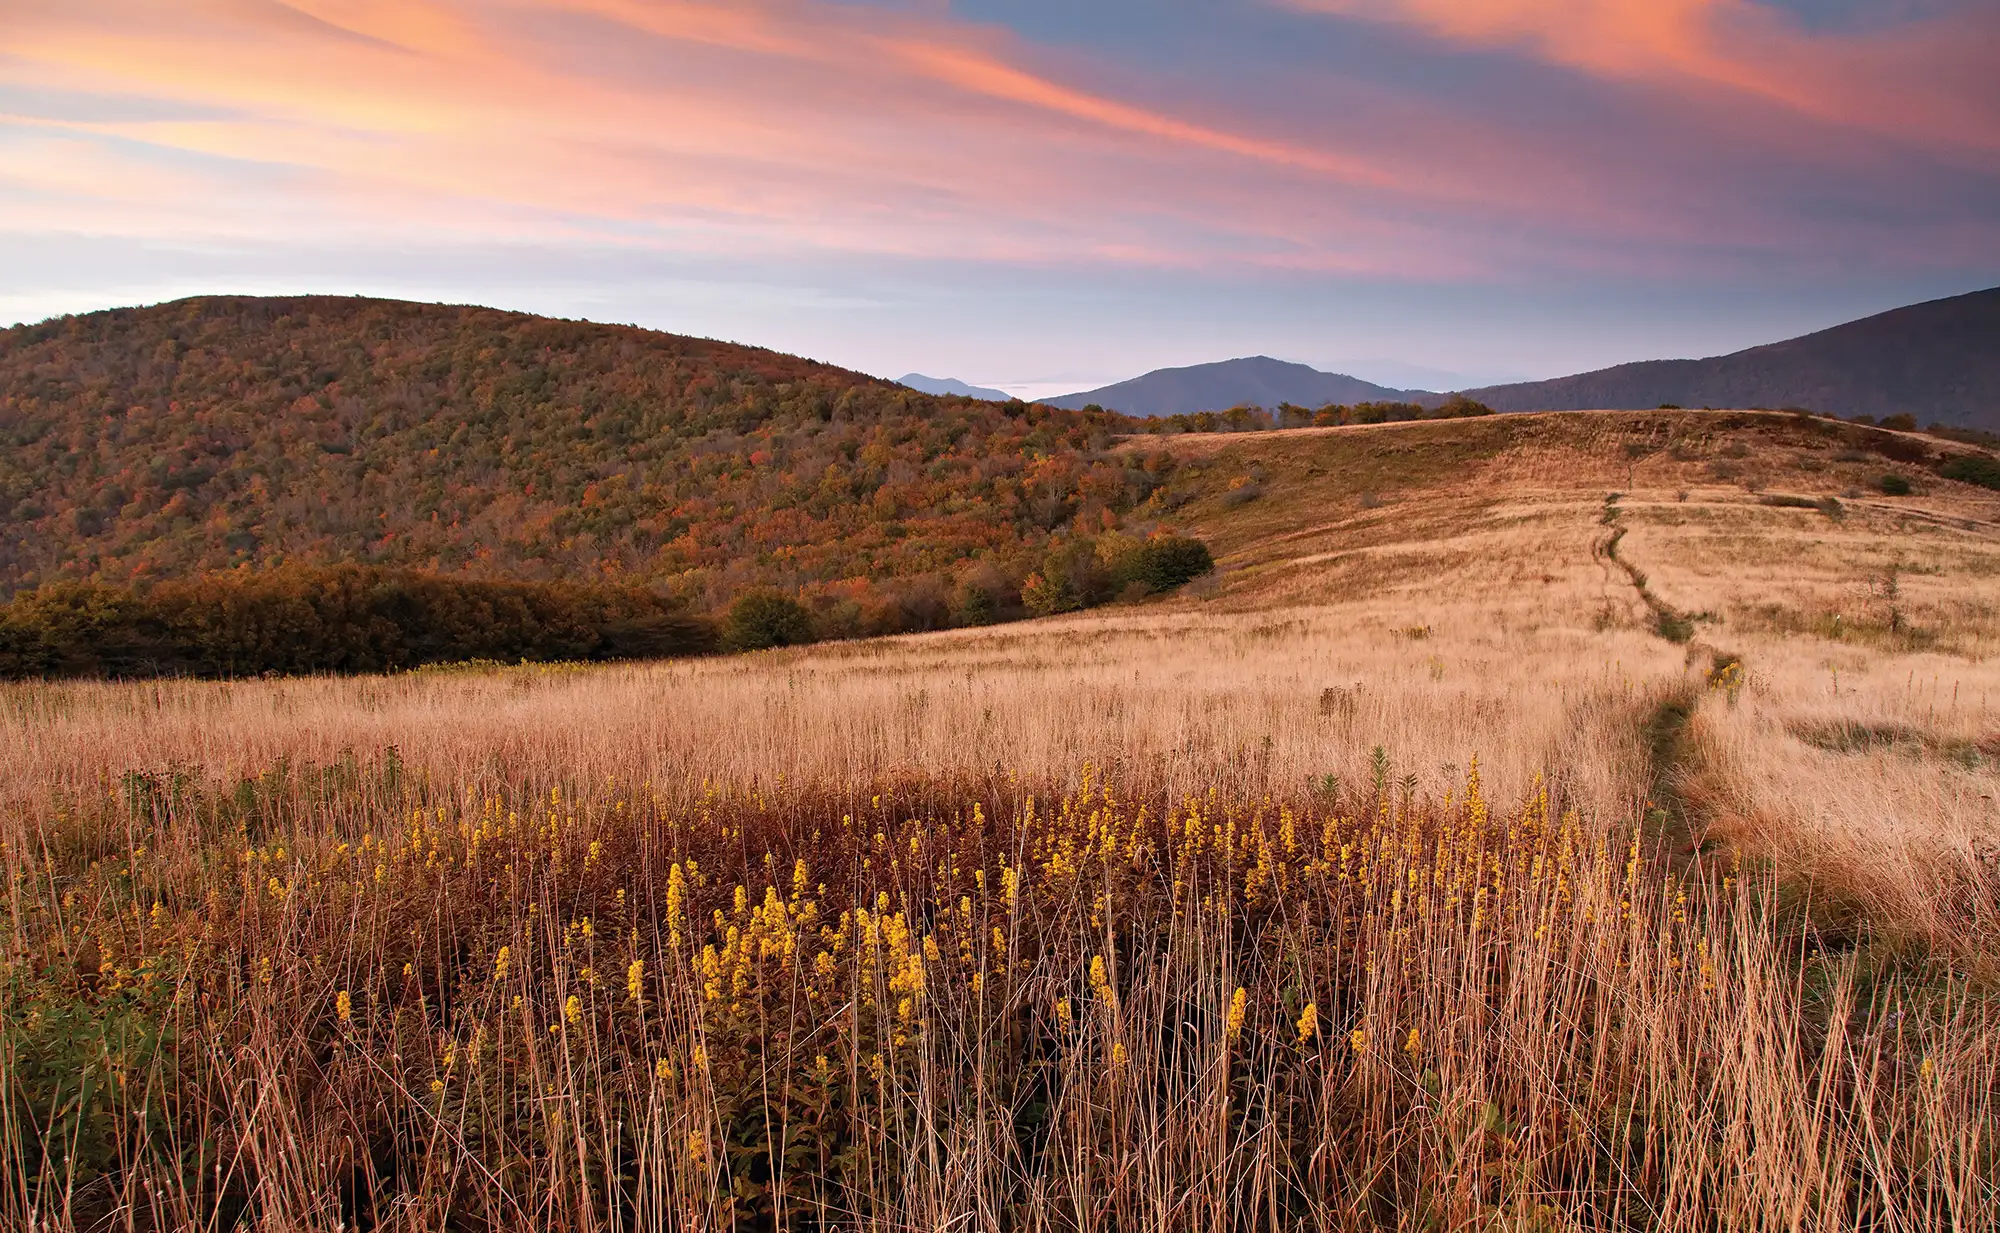 Field of goldenrod on Little Hump Mountain, in North Carolina during sunset